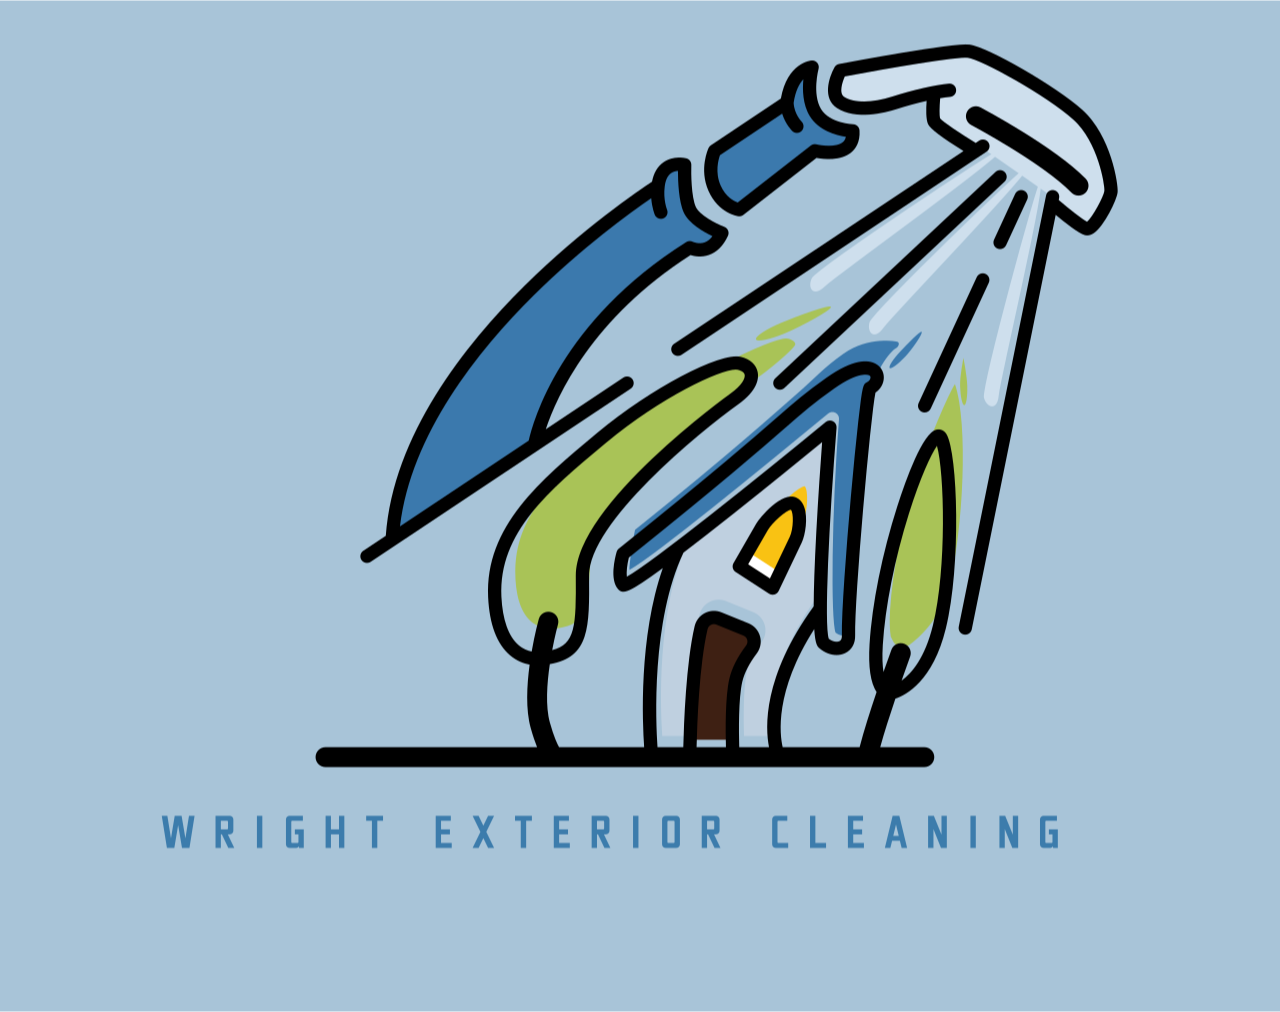 Exterior Cleaning Services - wrightexteriorcleaning's logo